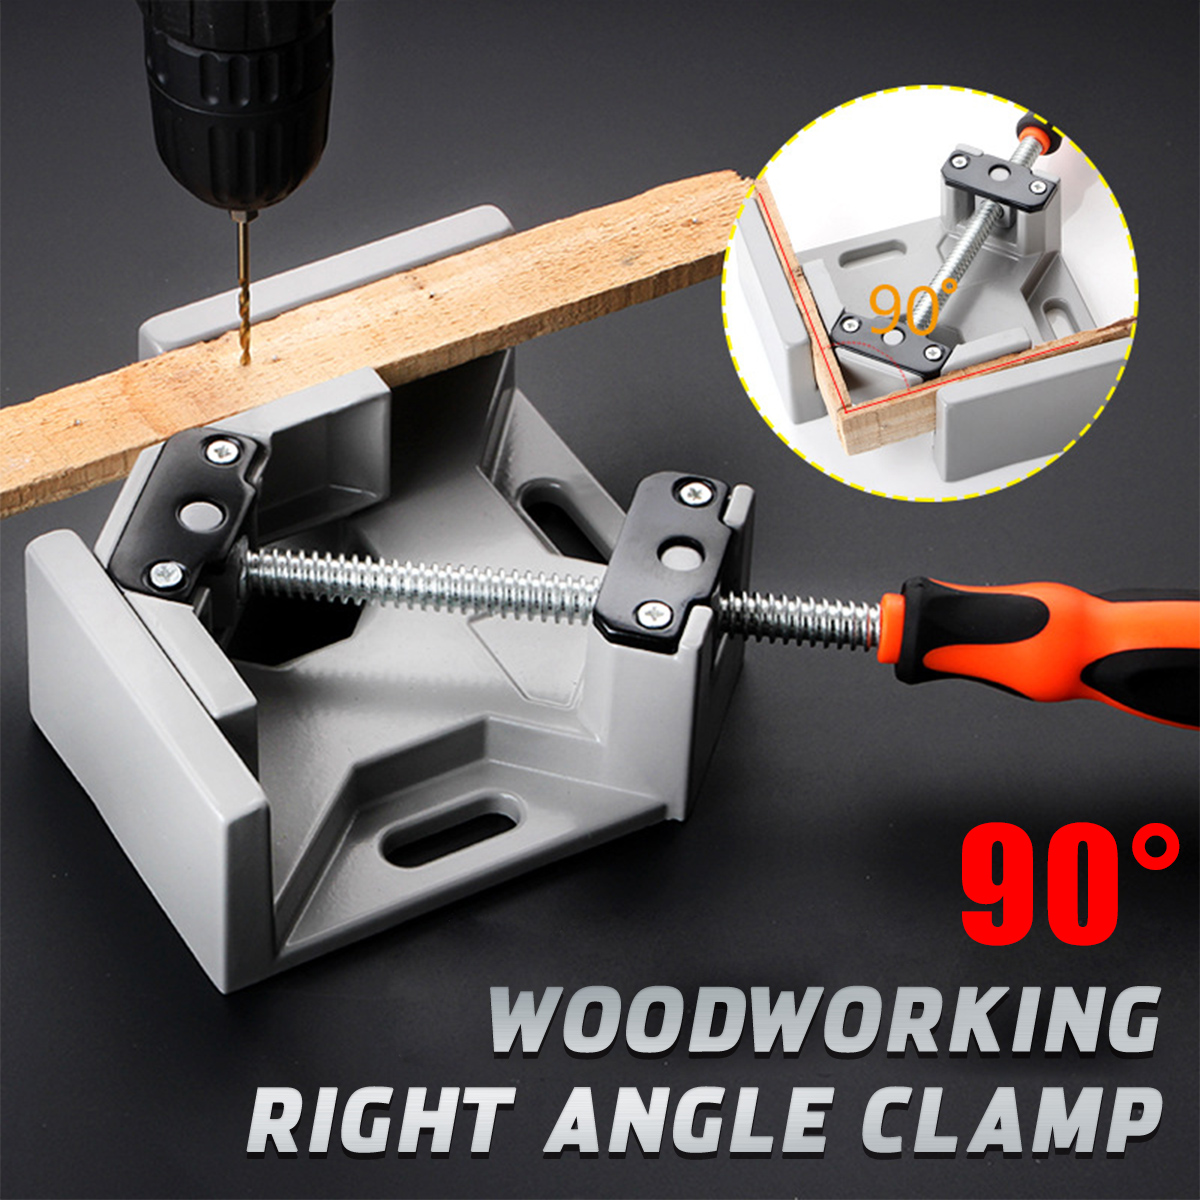 90-Degree-Quick-Release-Corner-Clamp-Right-Angle-Welding-Woodworking-Photo-Frame-Clamping-Tool-1768833-1